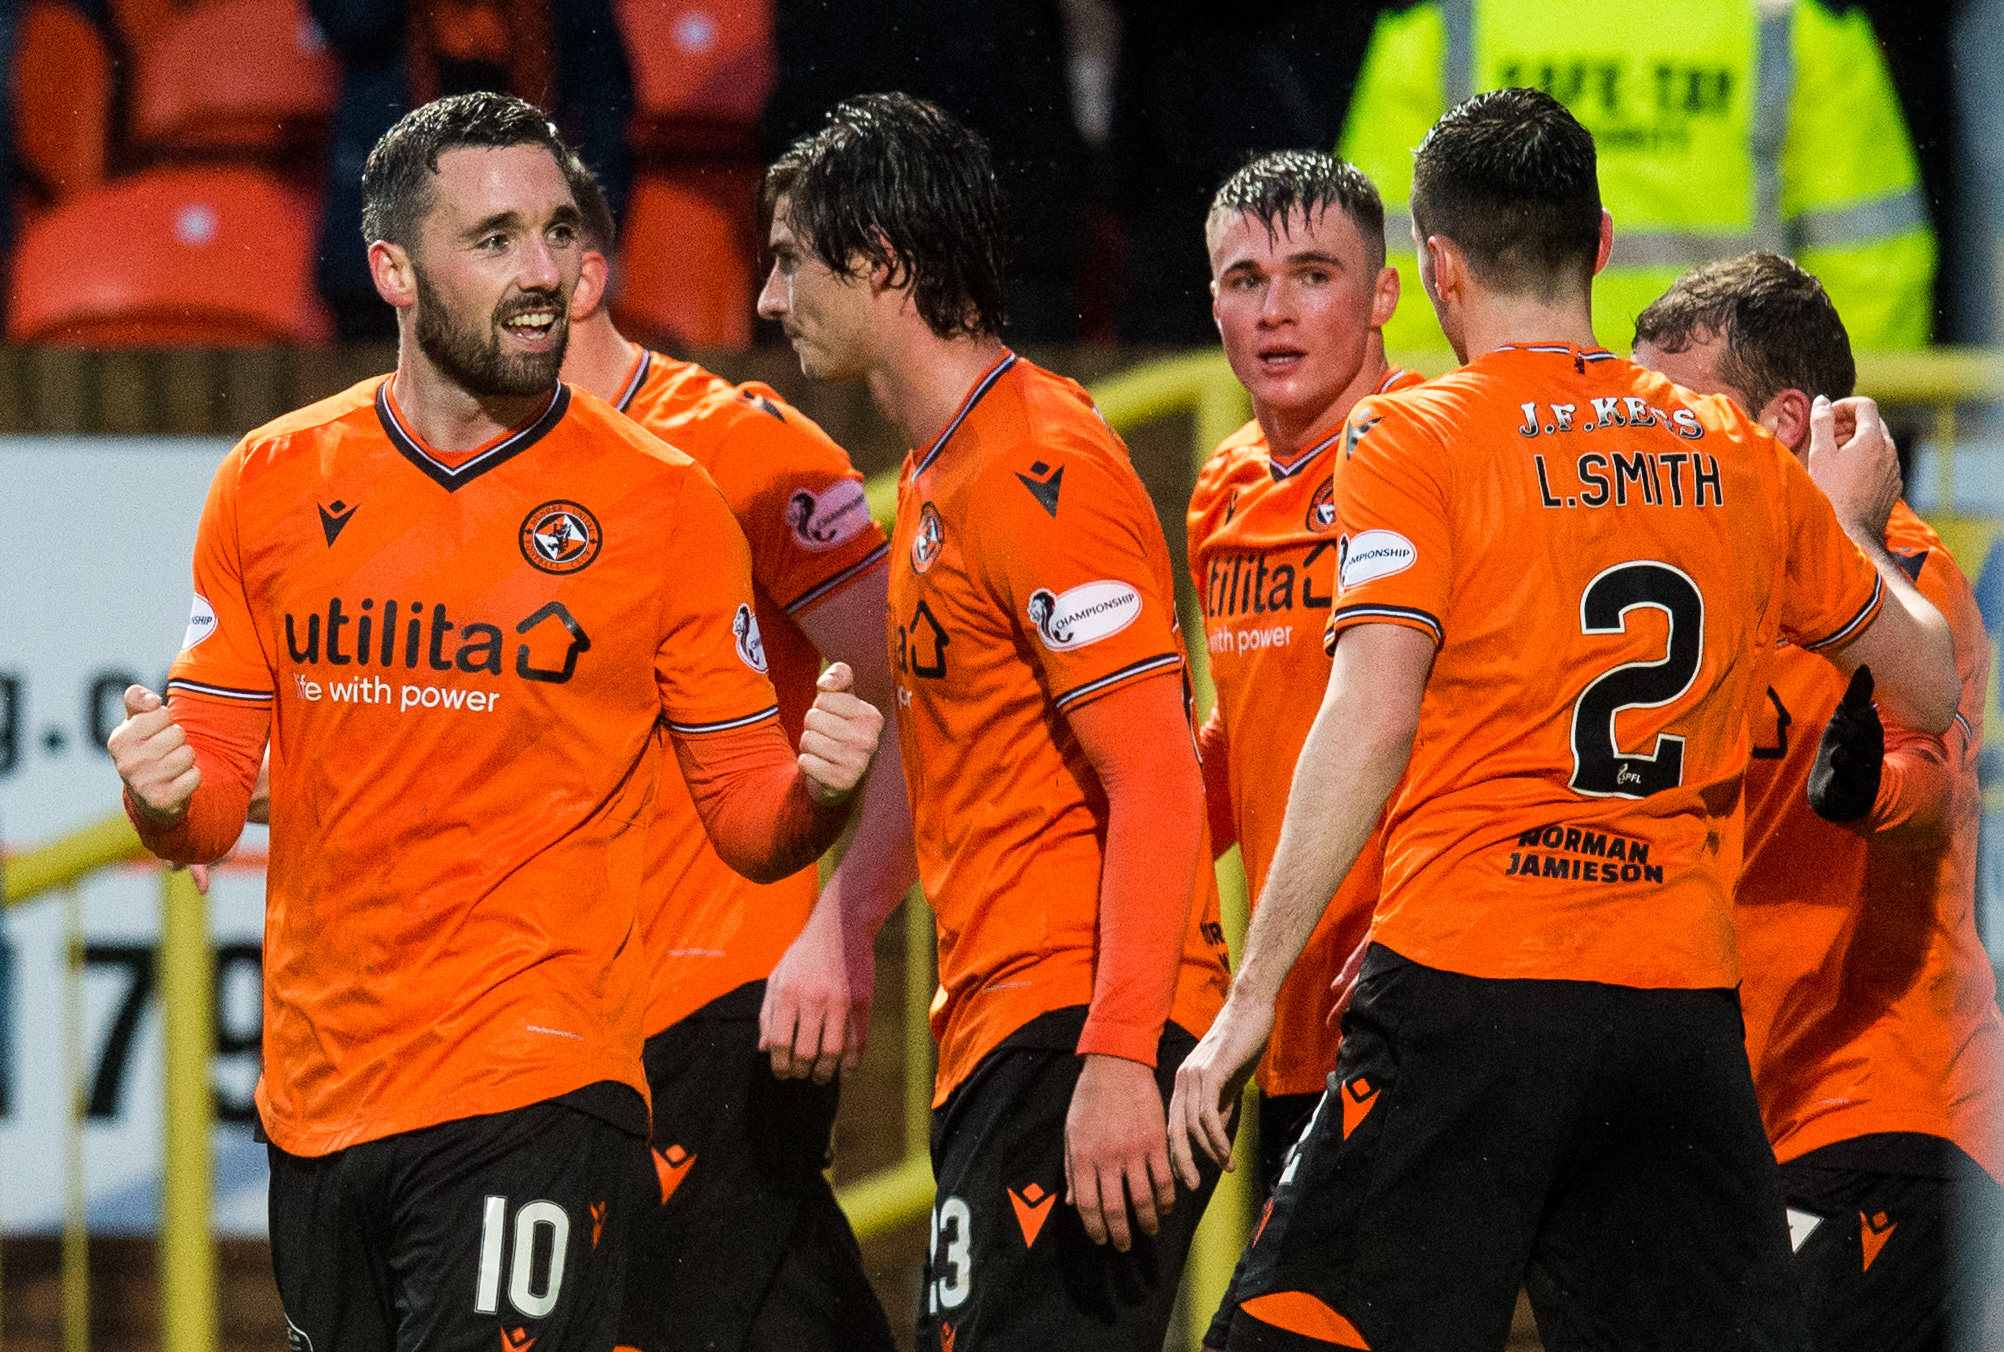 Dundee United were celebrating another win on Saturday.